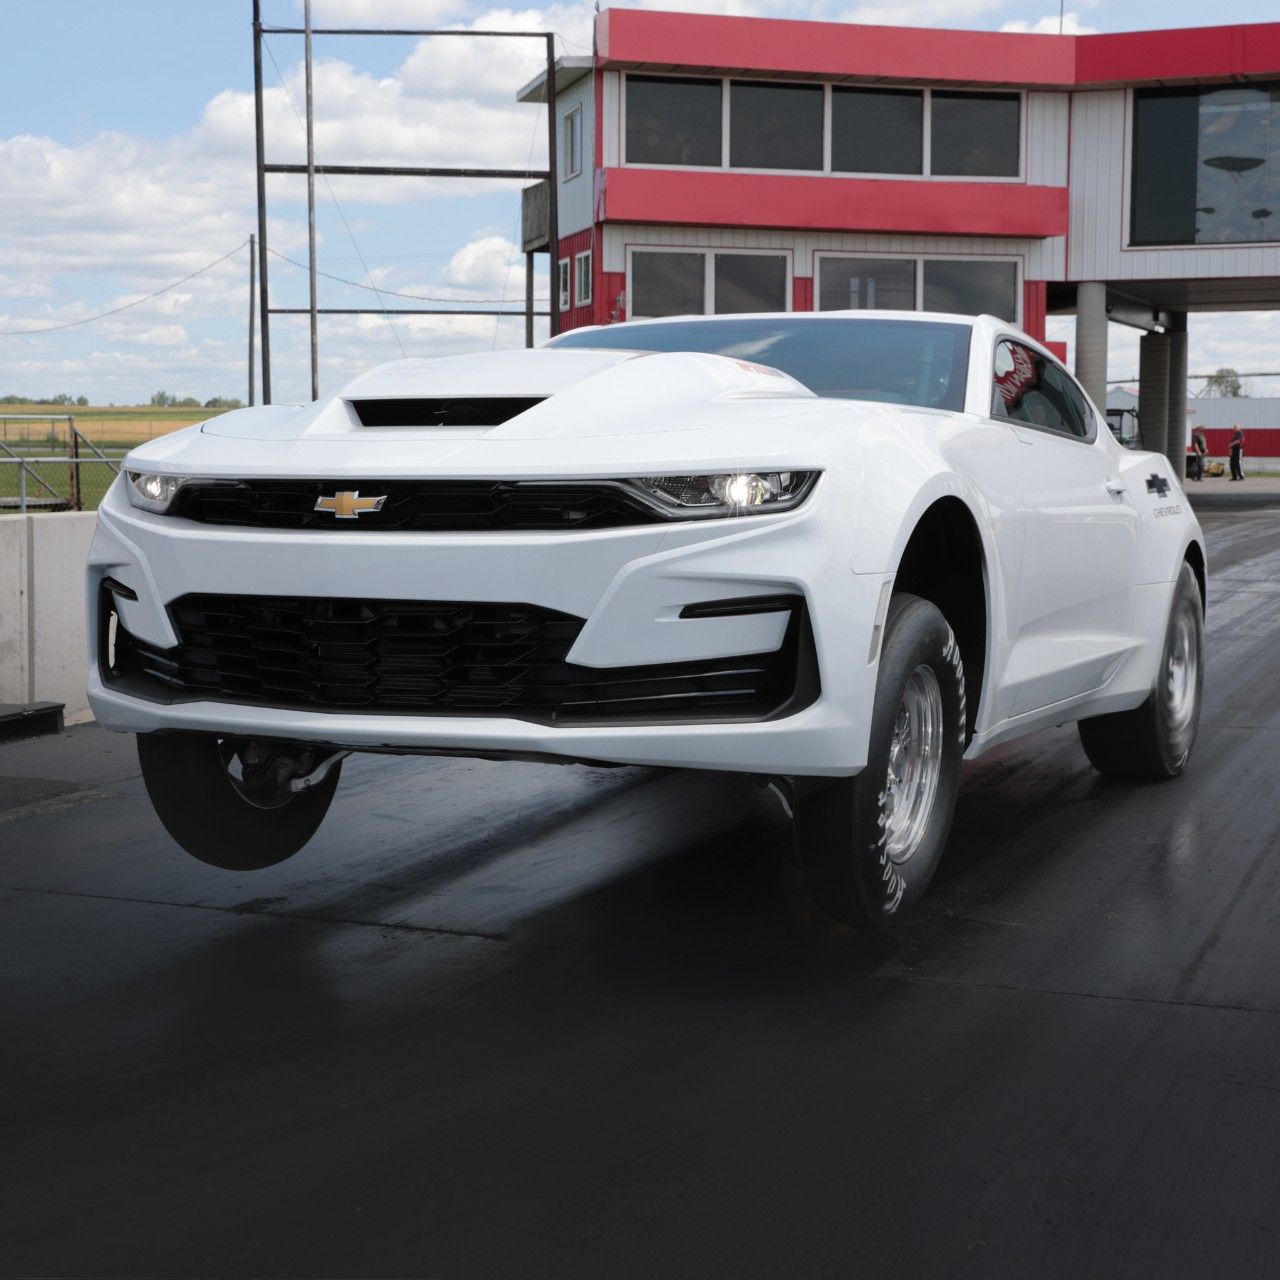 2022 Chevy COPO Camaro Revealed, Features a 572-Cubic-Inch V-8